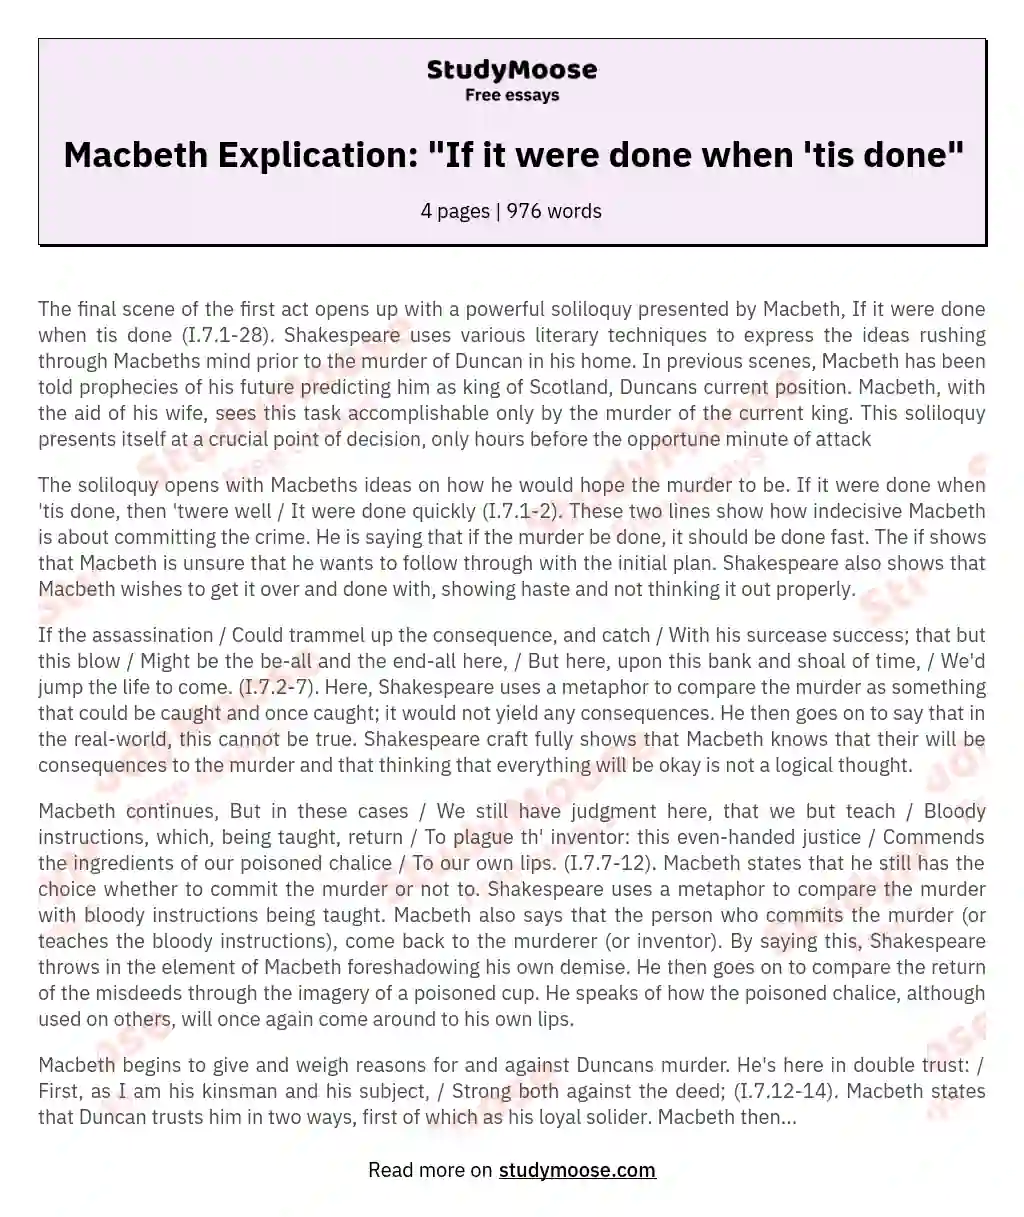 Macbeth Explication: "If it were done when 'tis done" essay